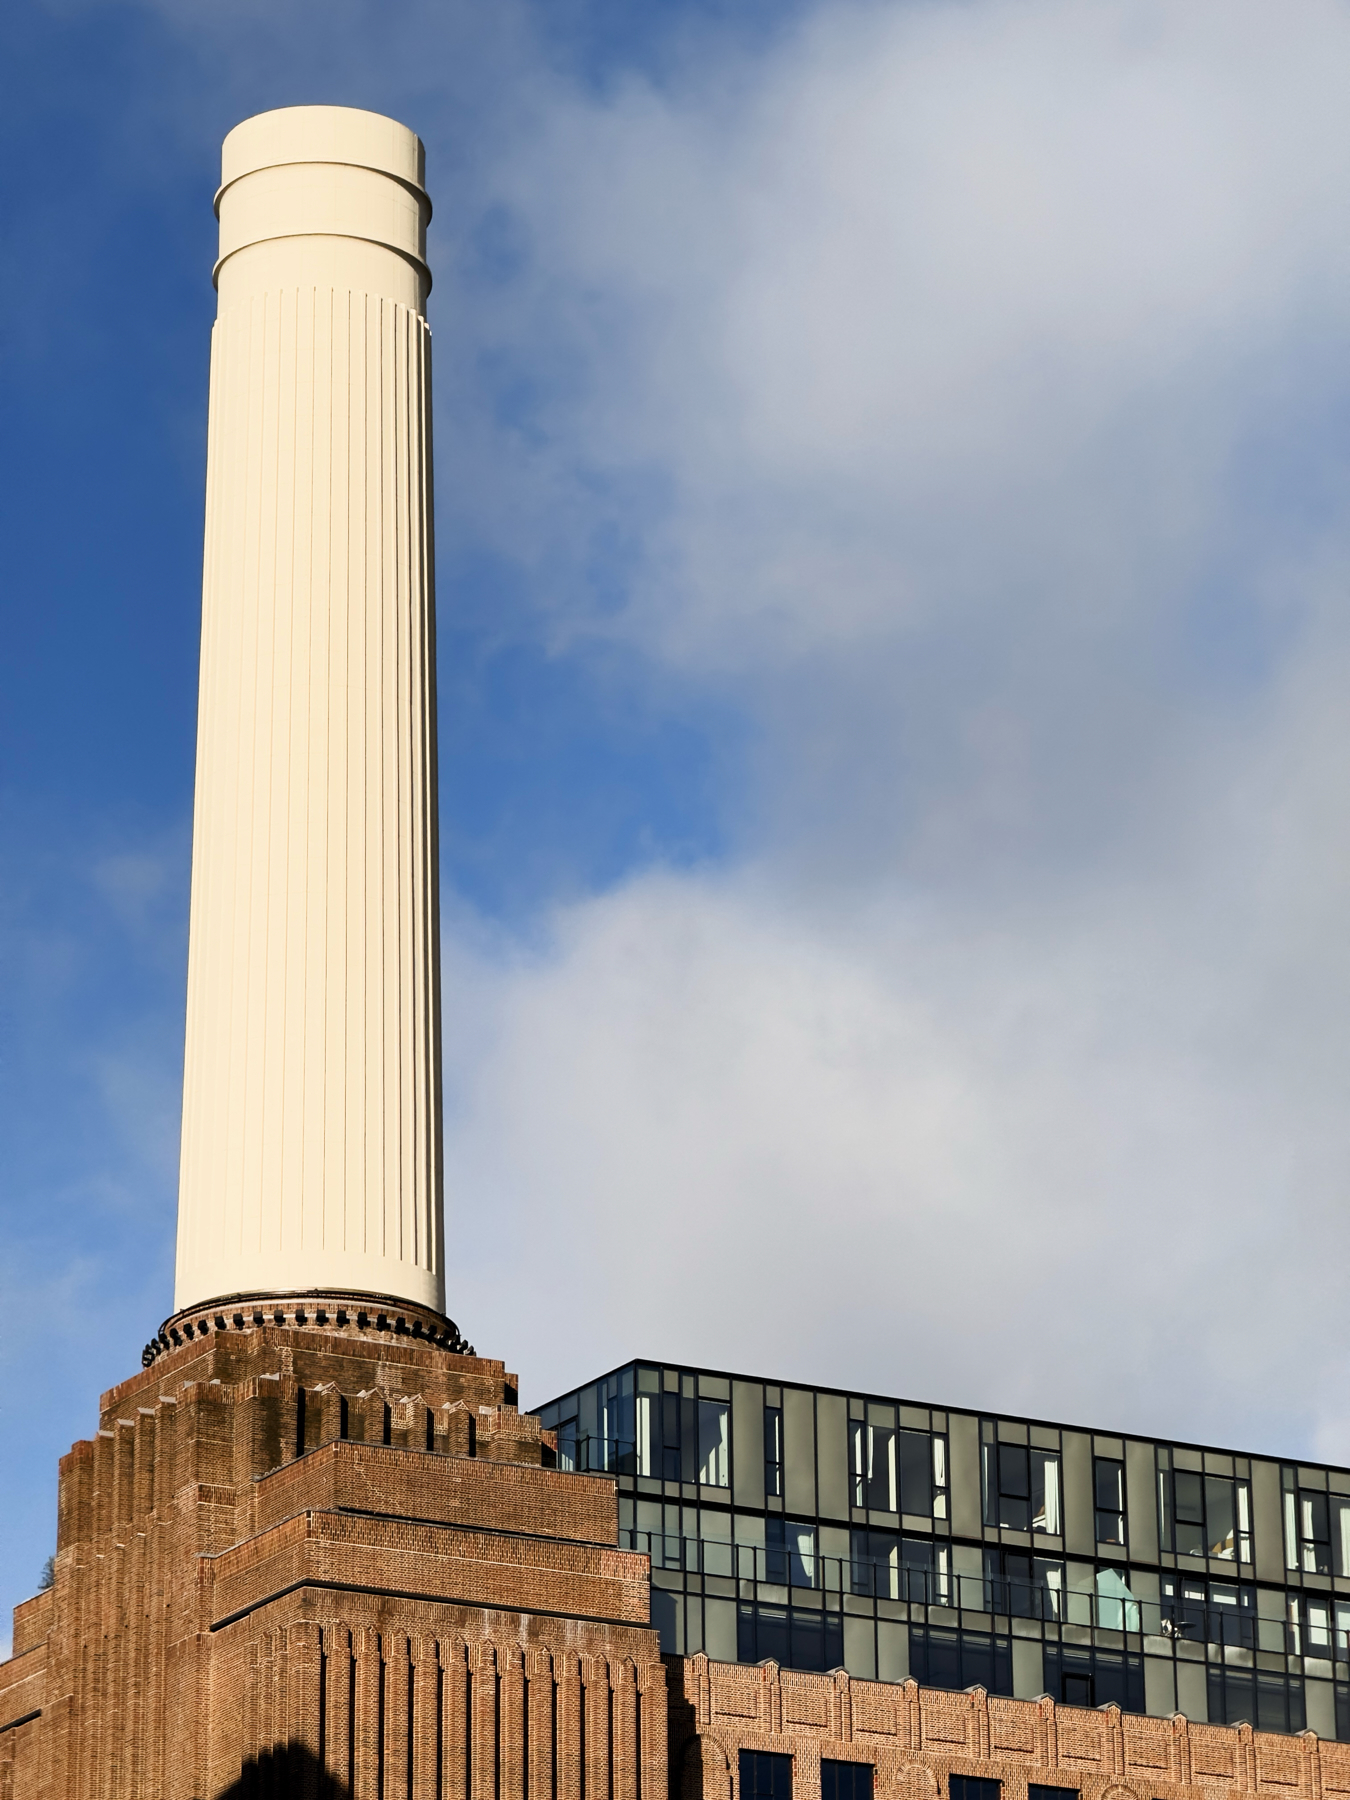 A large, cylindrical white chimney stack rises above a brick building with modern glass extensions, against a blue sky with light clouds.